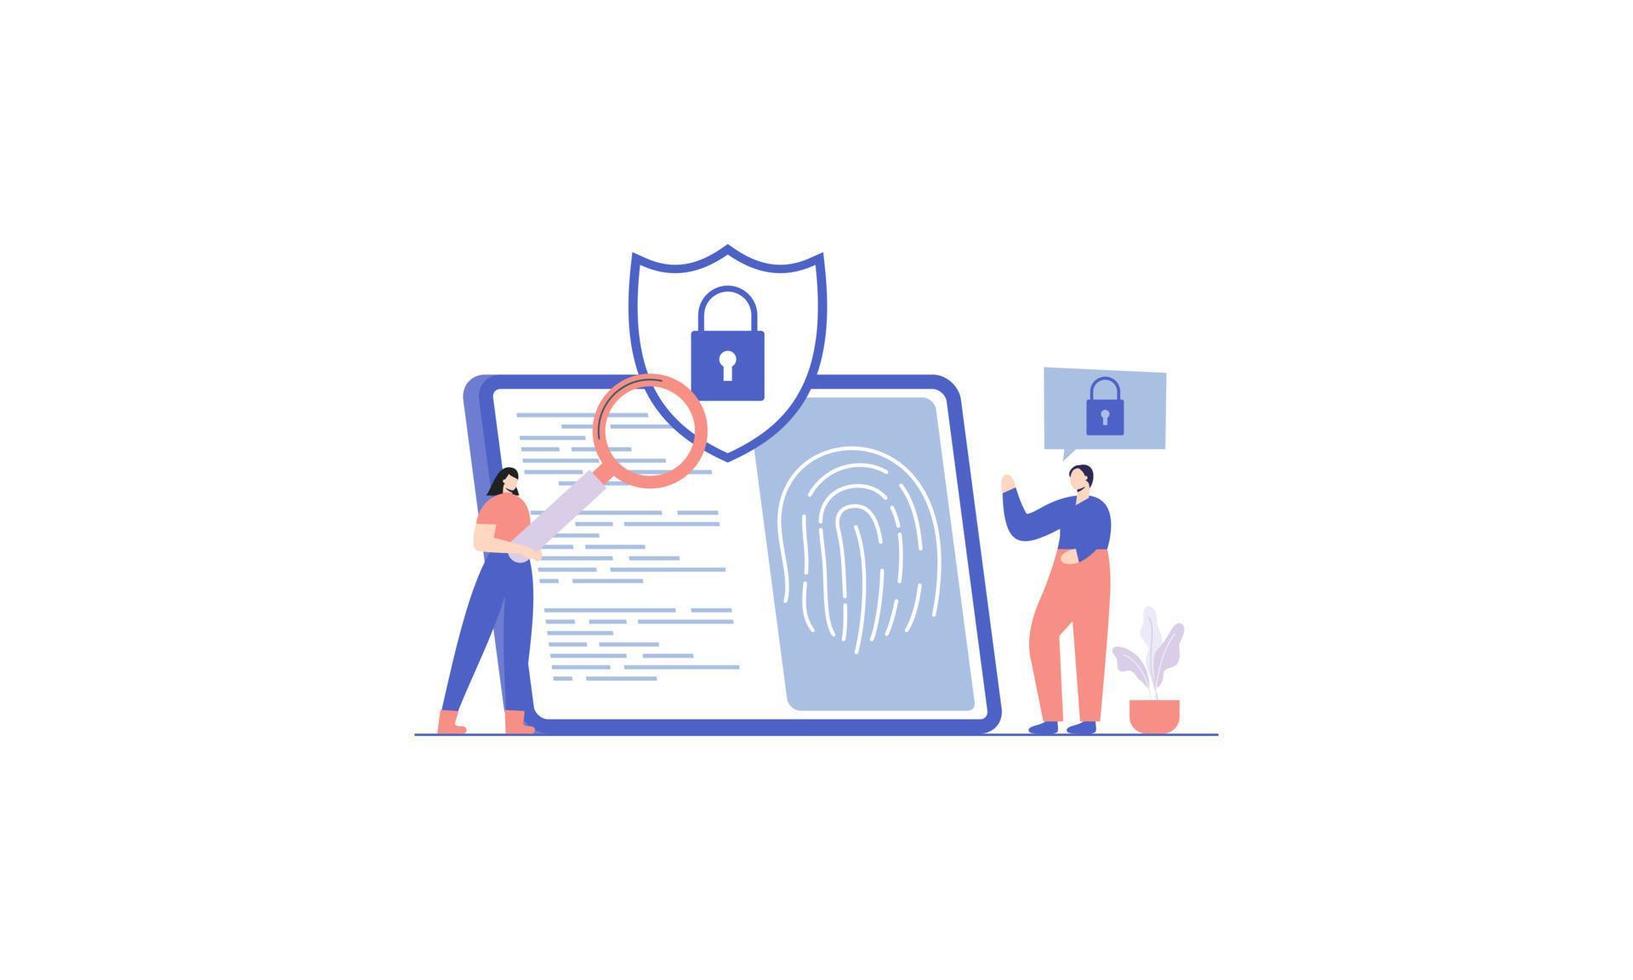 People and cyber security illustration concept vector